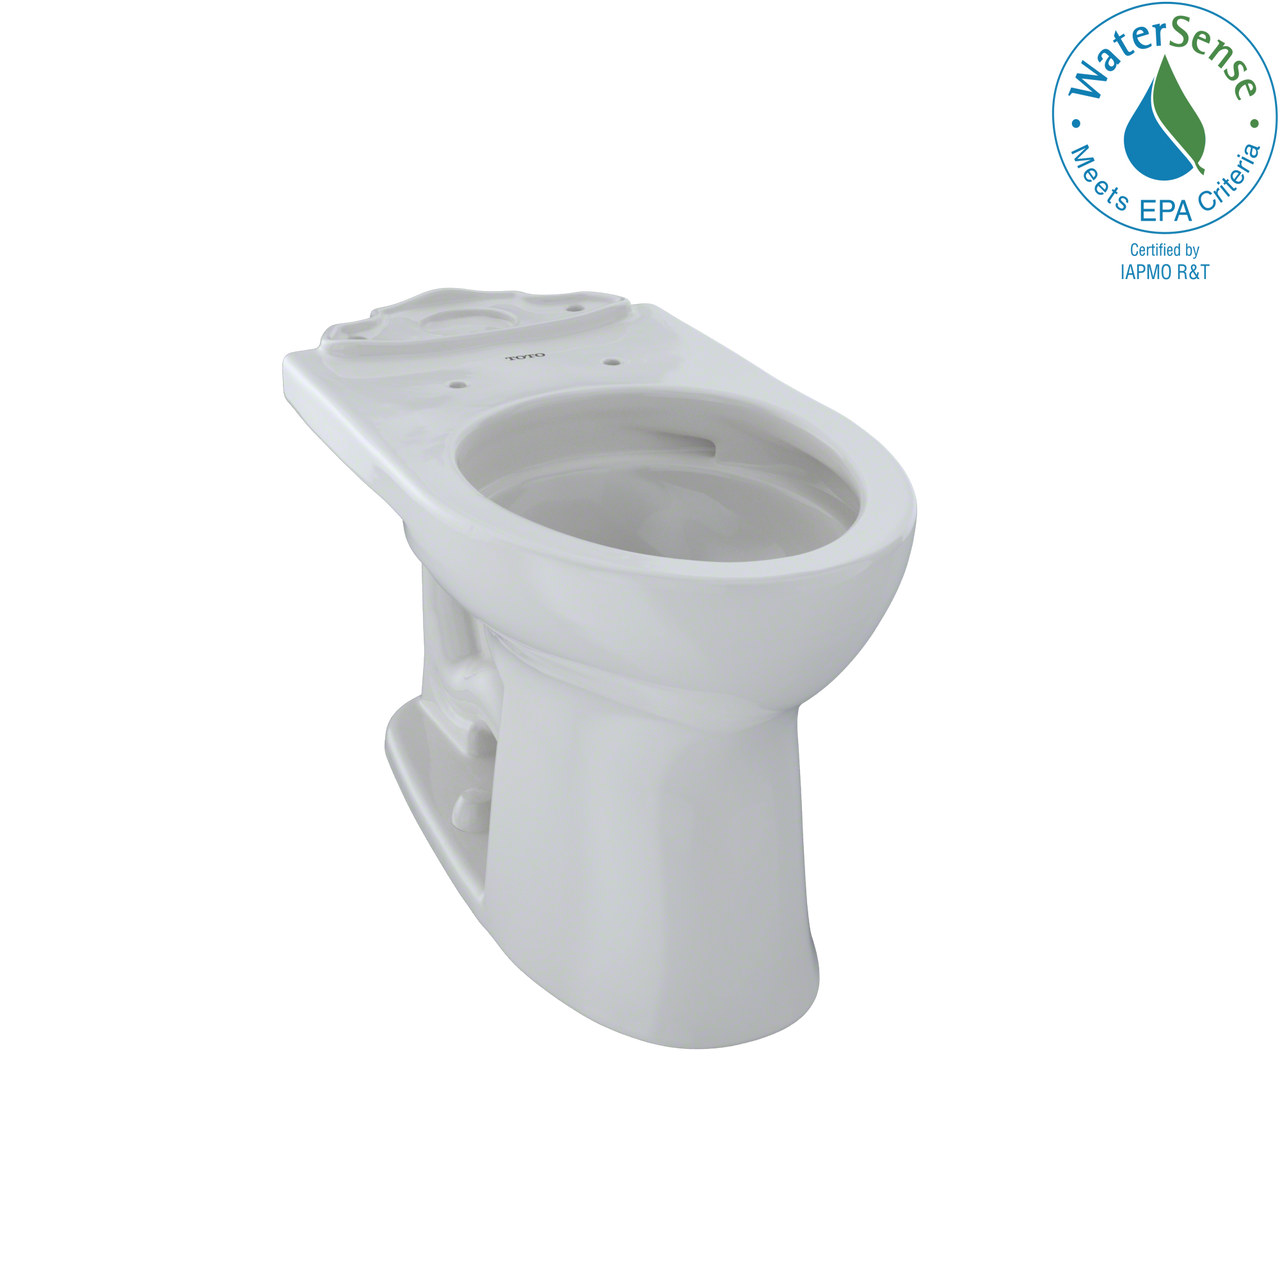 TOTO Drake II Universal Height Elongated Toilet Bowl with CeFiONtect,   - C454CUFG#11 - BNGBath